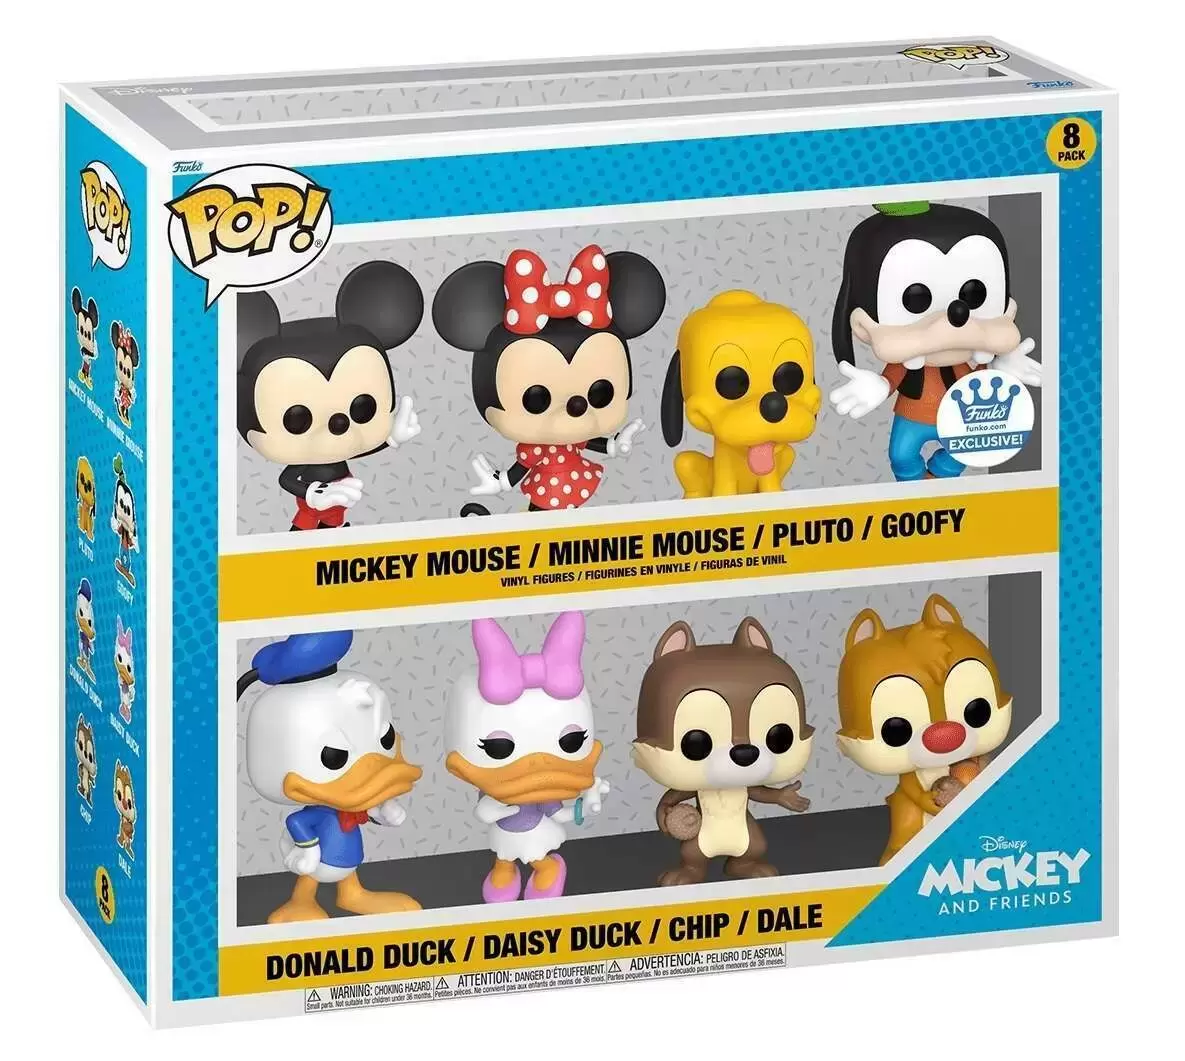 Mickey and Friends 8 Pack - POP! Disney action figure